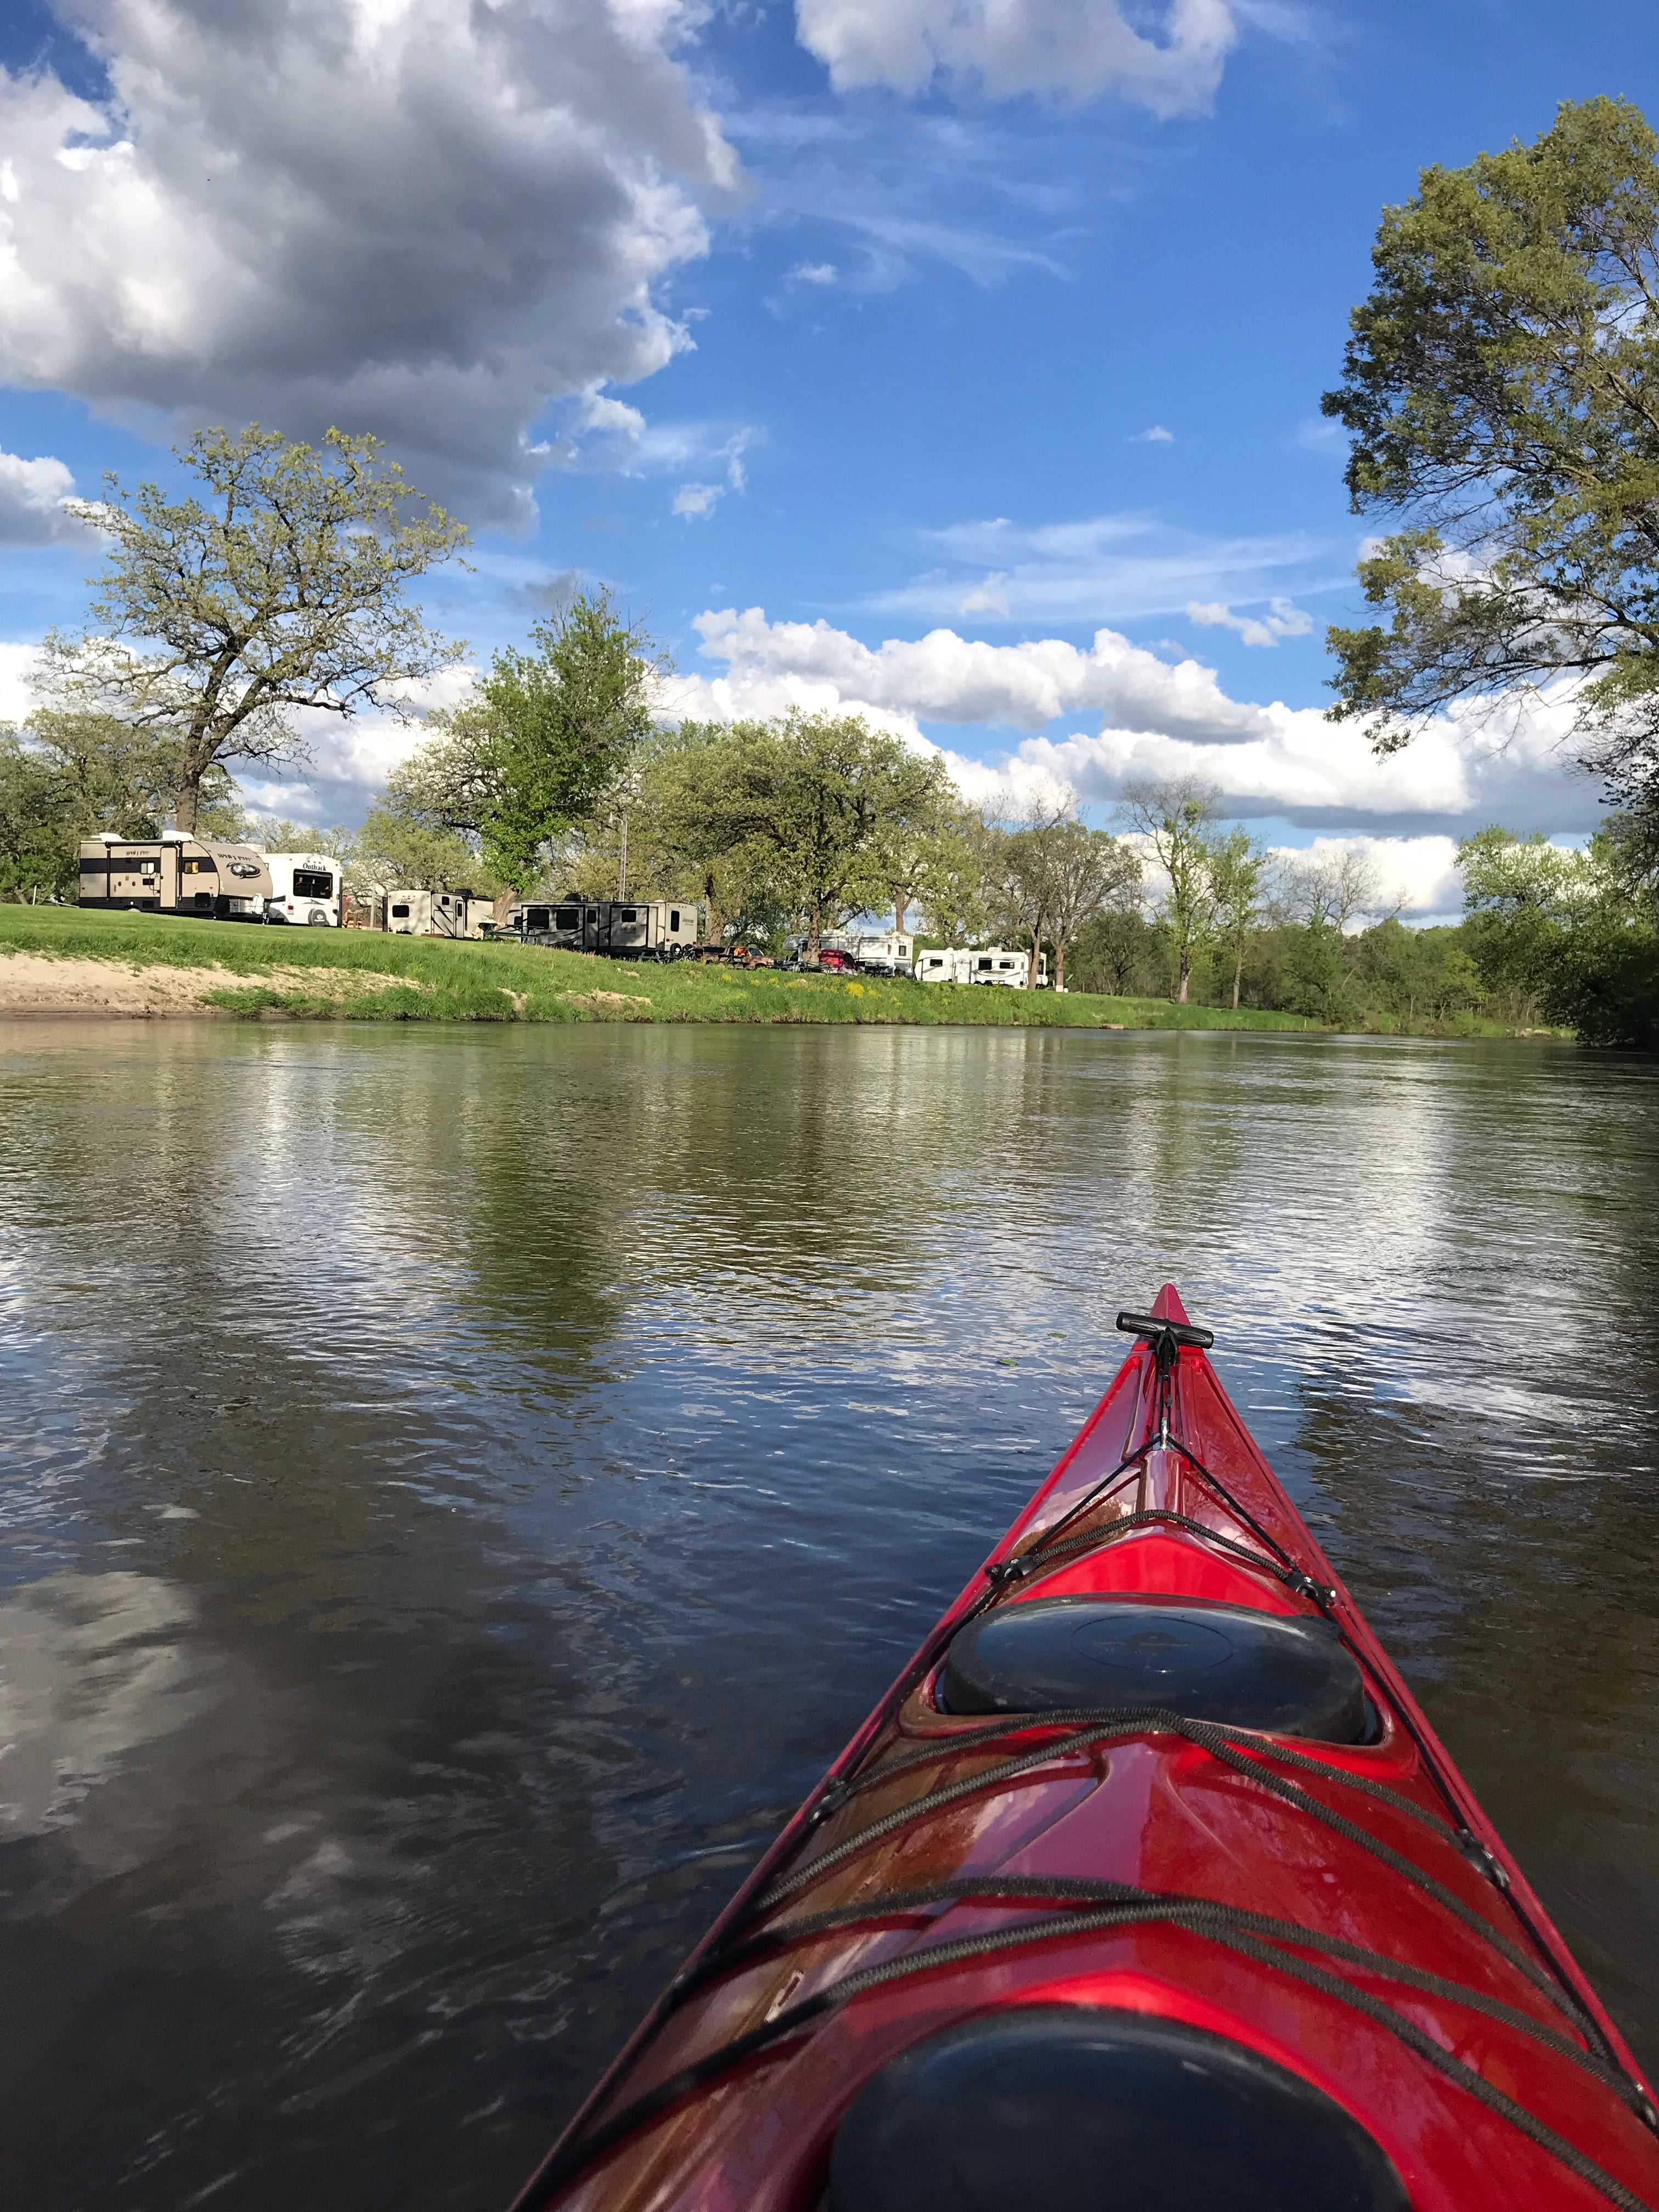 Kayaking past the campers on the river